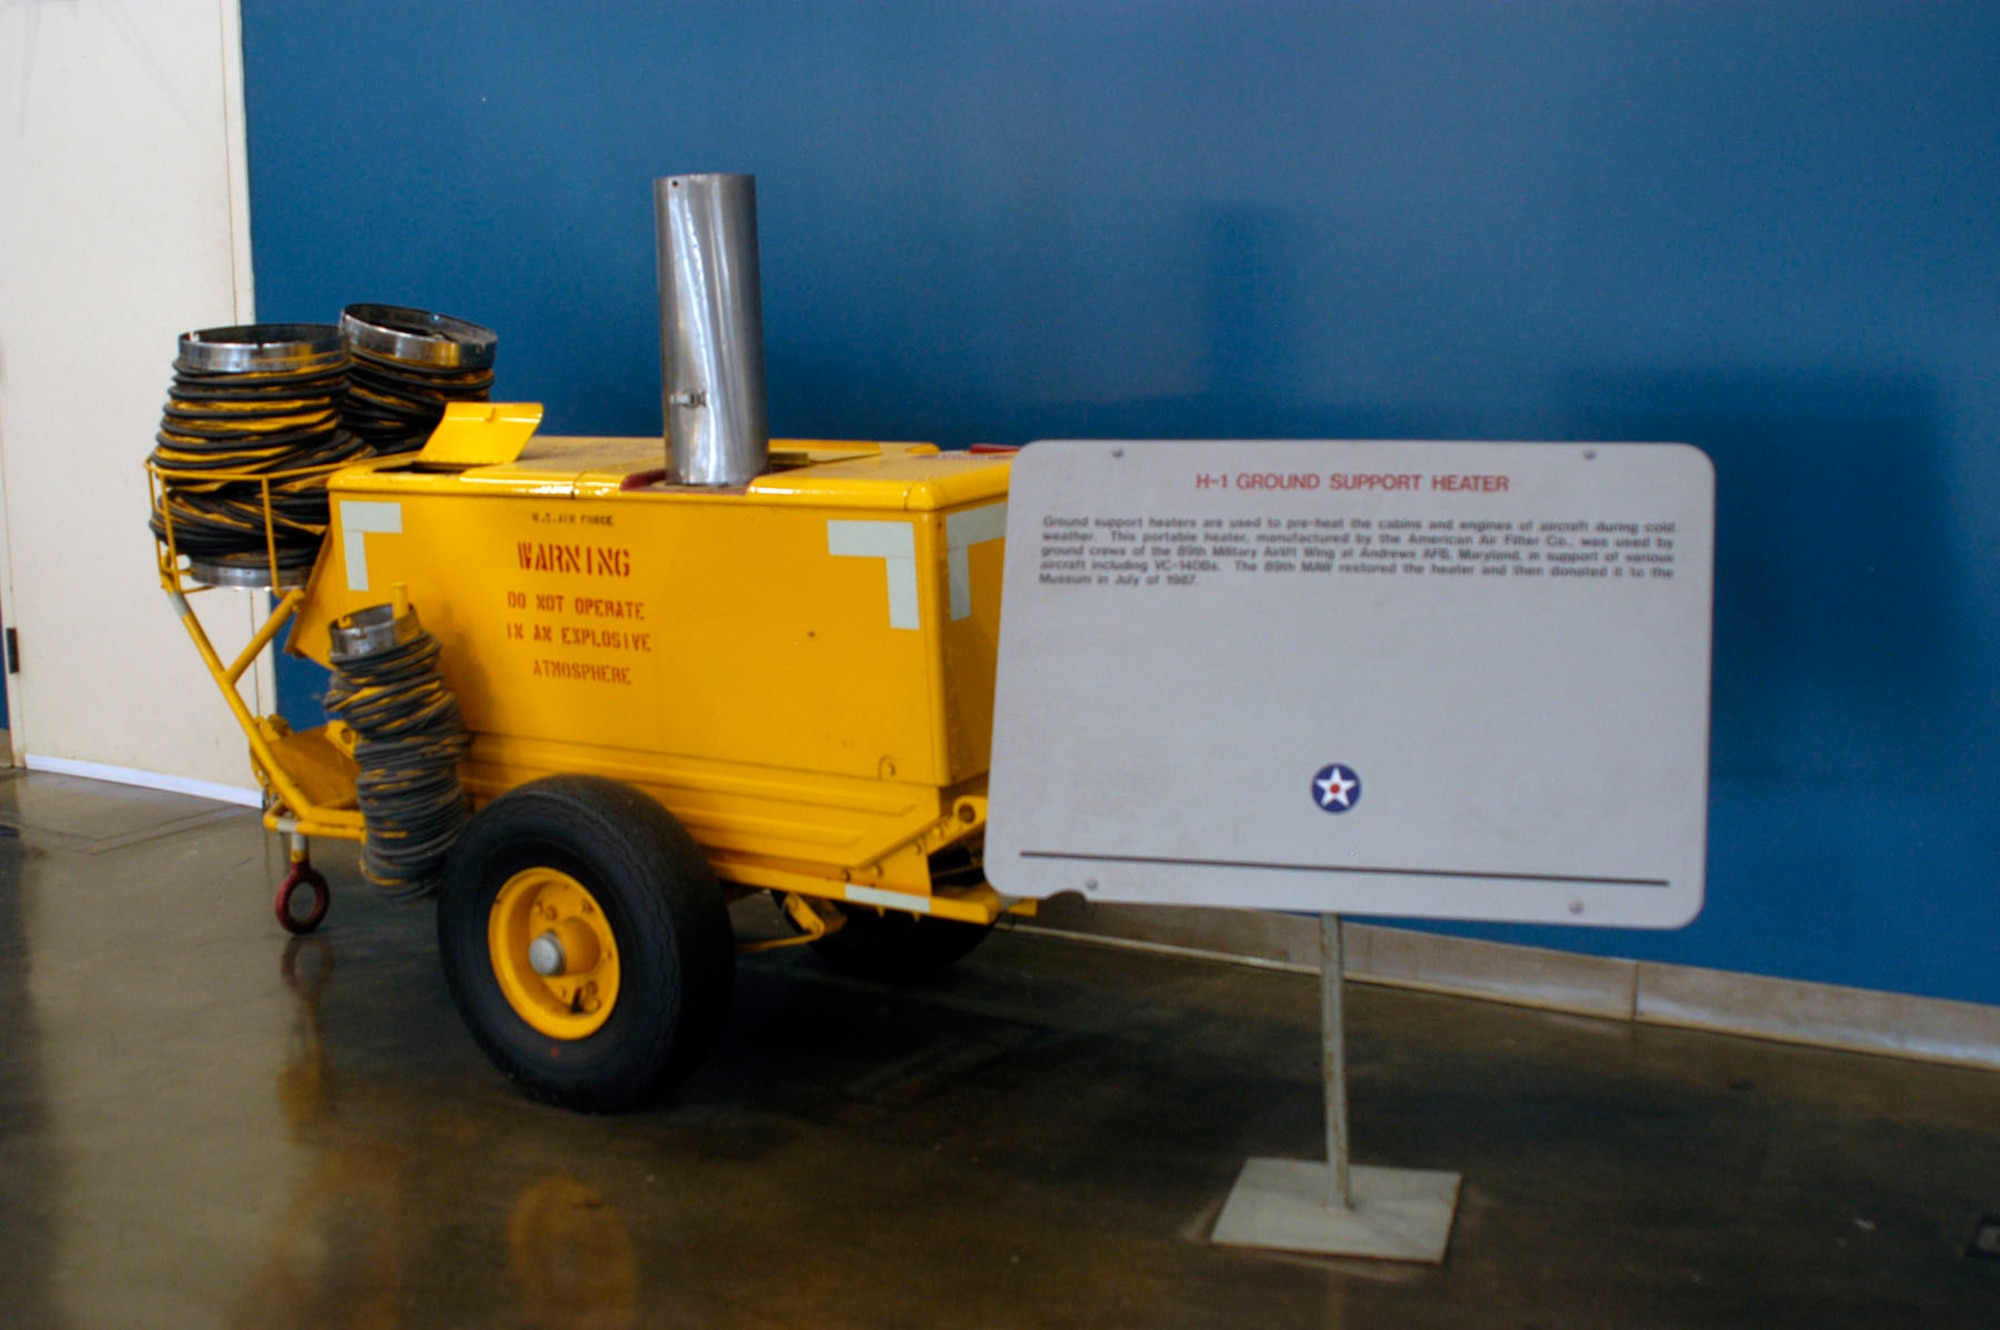 DAYTON, Ohio -- H-1 Ground Support Heater on display at the National Museum of the United States Air Force. (U.S. Air Force photo)